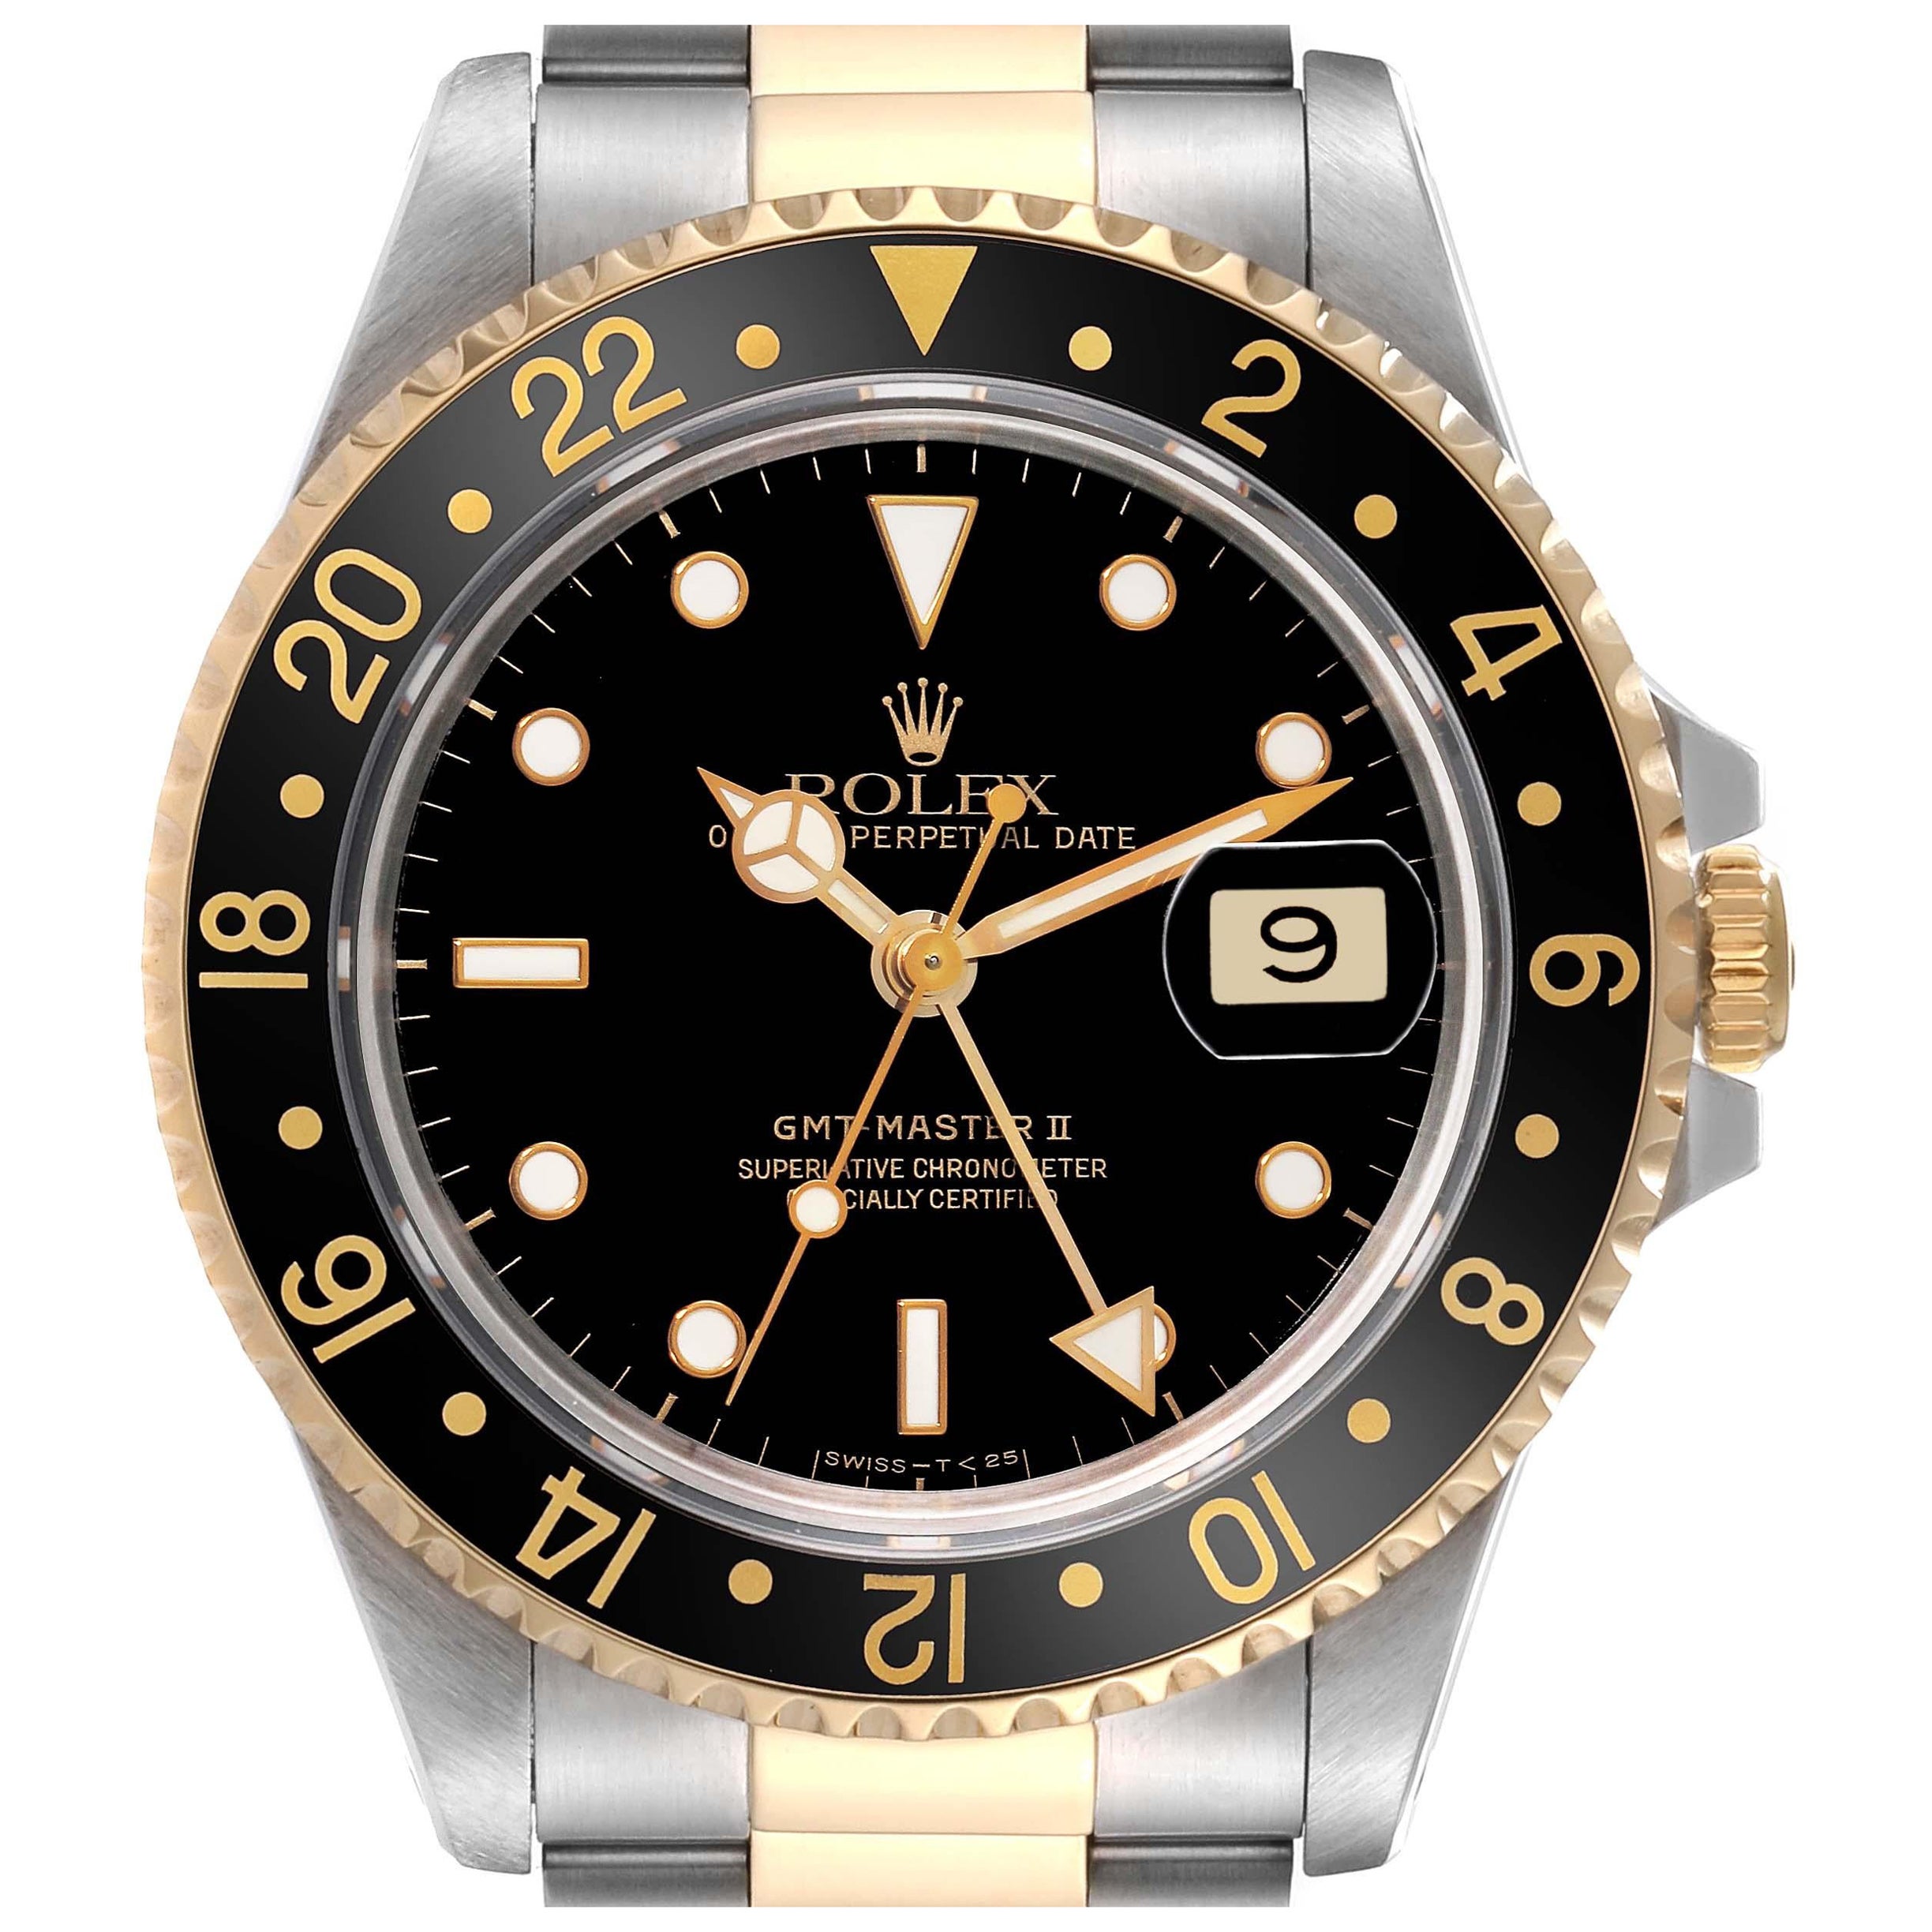 Rolex GMT Master II Yellow Gold Steel Oyster Bracelet Mens Watch 16713 For Sale